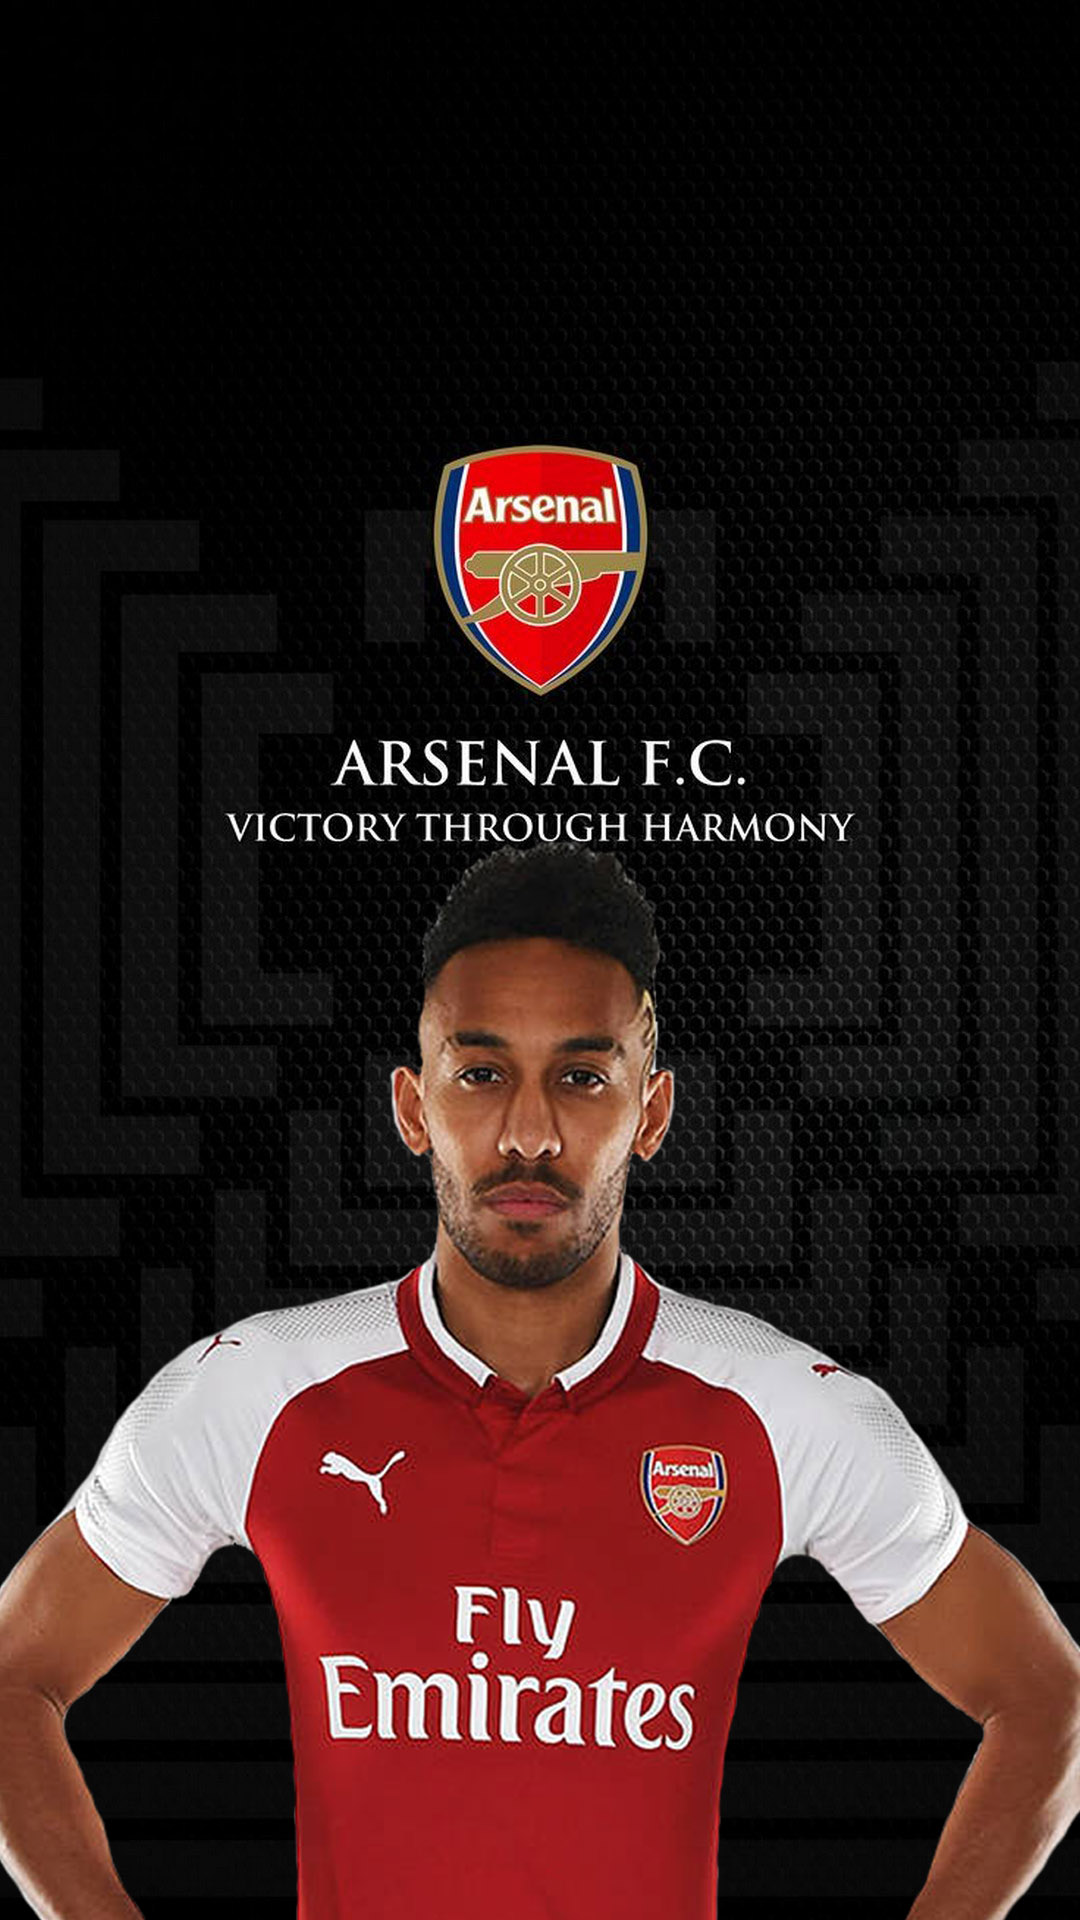 Pierre Emerick Aubameyang Arsenal Wallpaper Android with HD resolution 1080x1920